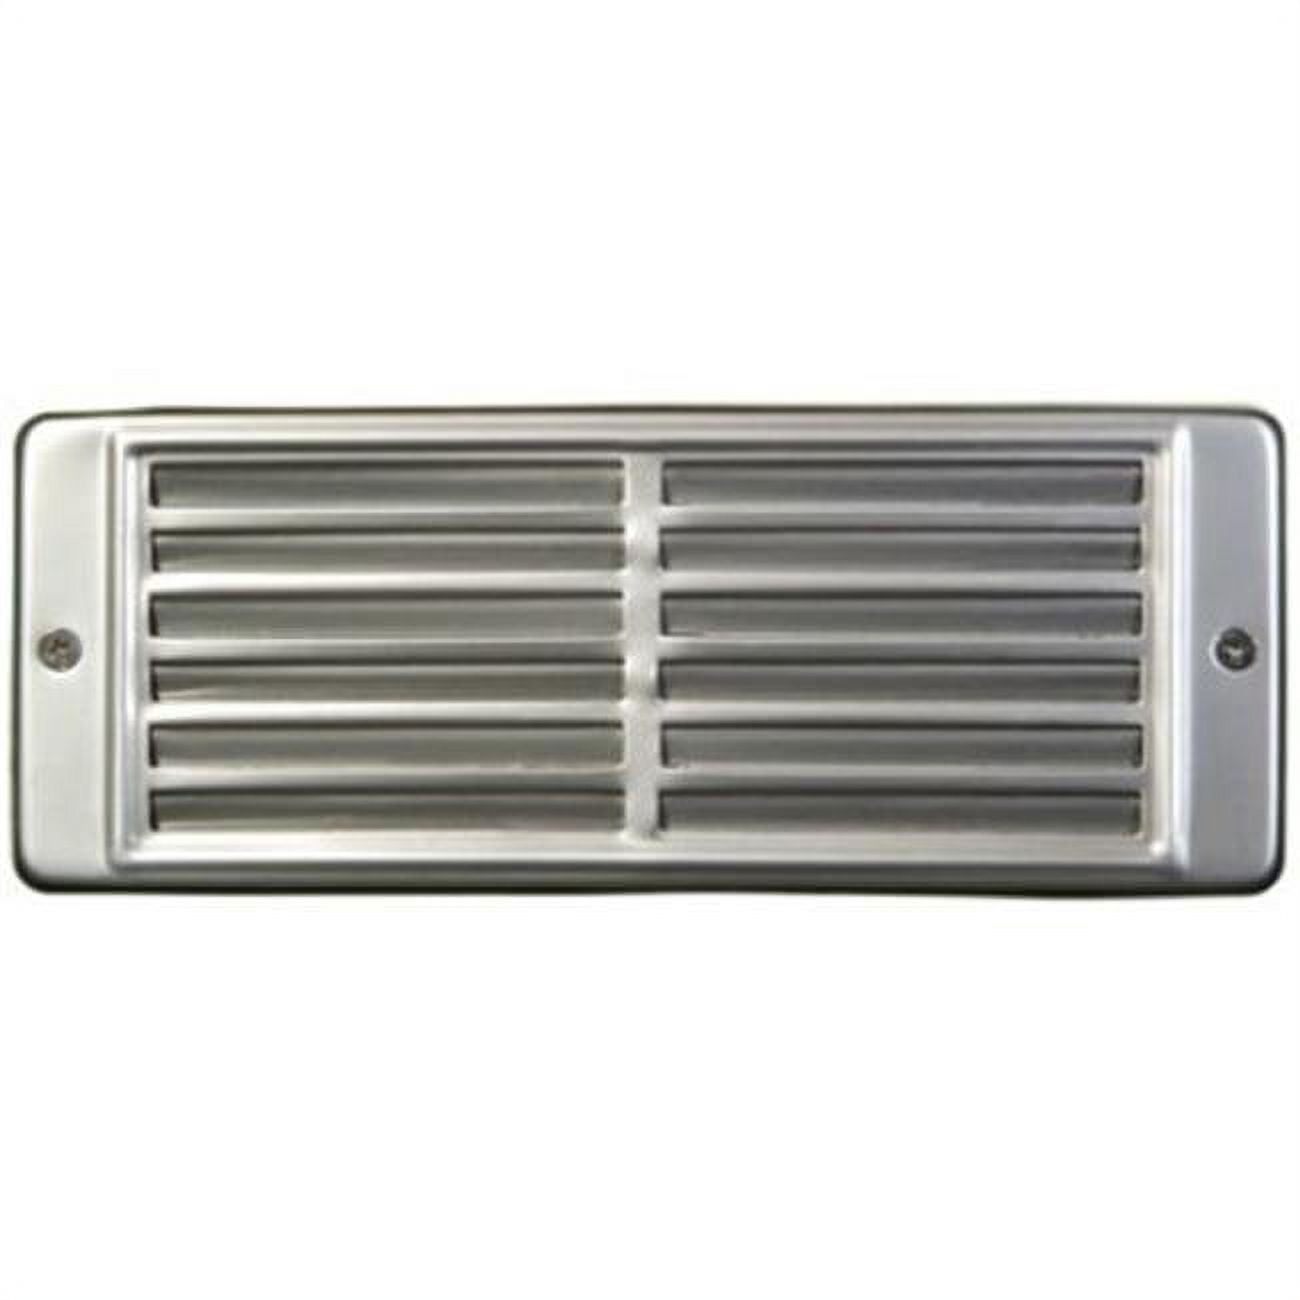 LV600-SS304 2x 20W 12V Recessed Stainless Steel Louvered Brick Step Wall Light - JC Type Lamp, 304 Stainless Steel -  Dabmar Lighting